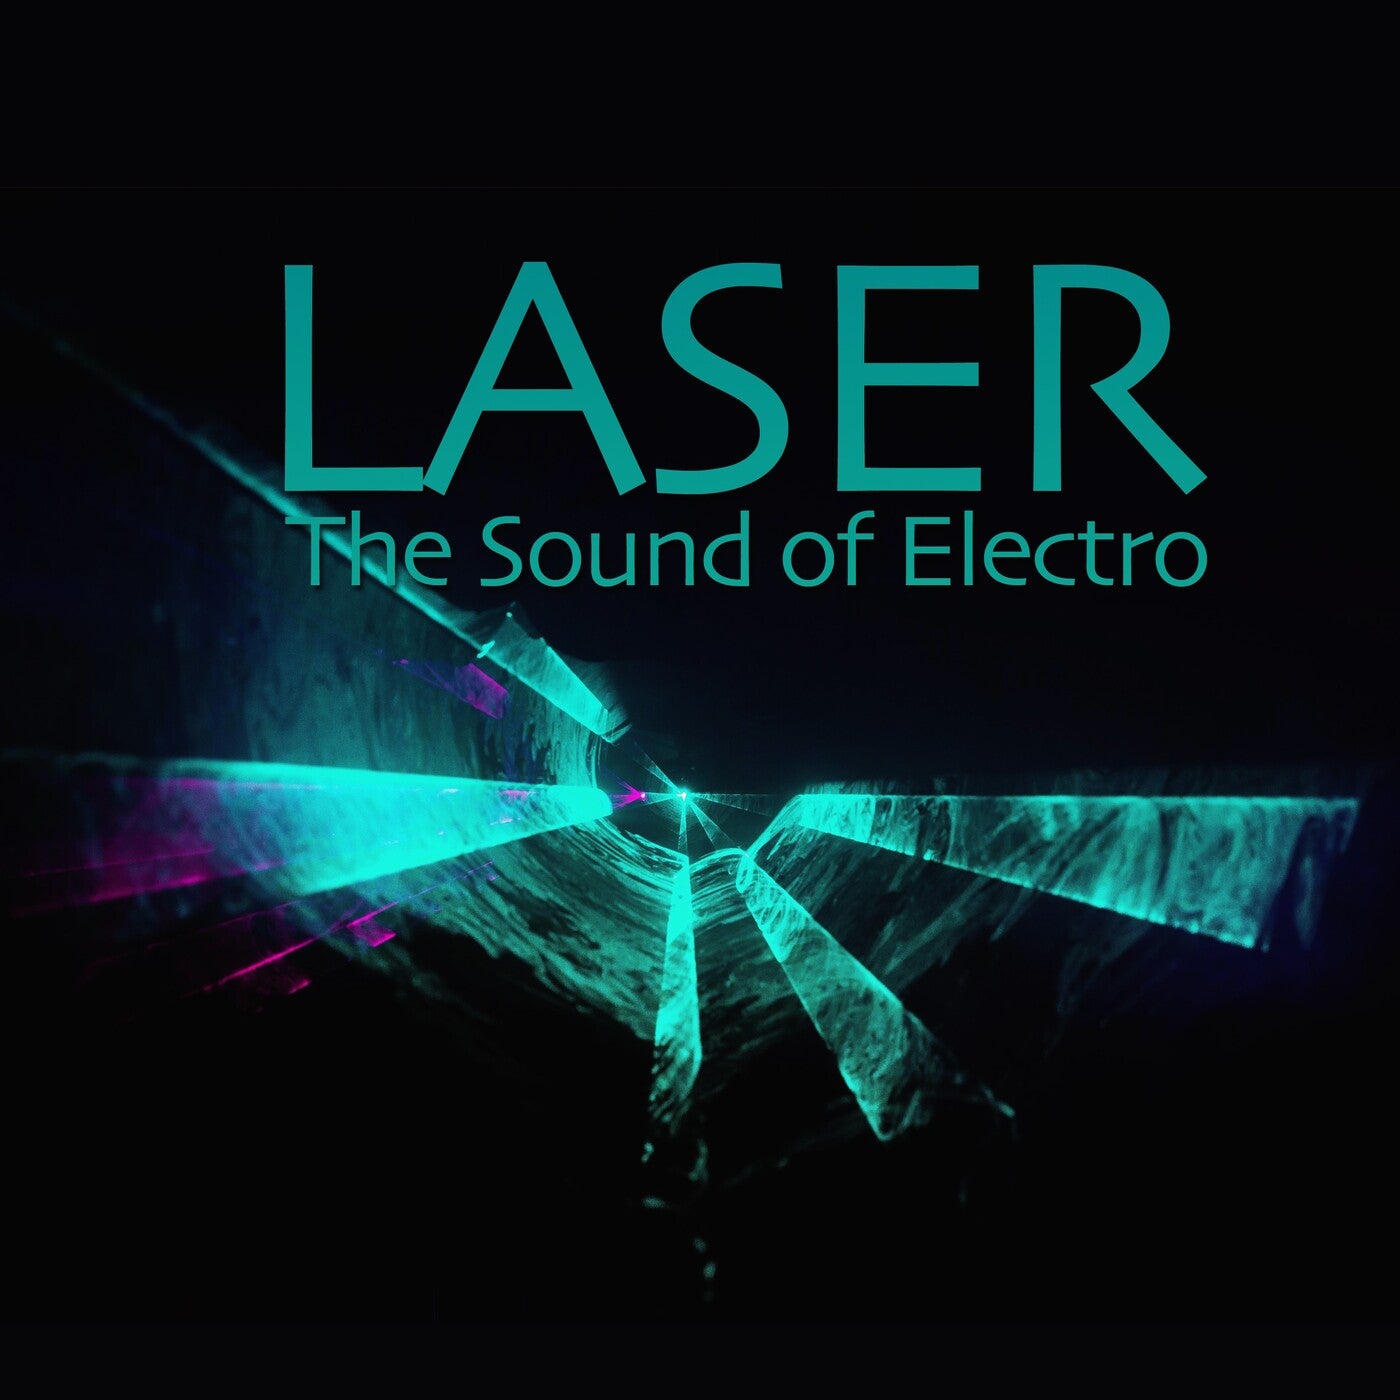 Laser (The Sound of Electro)